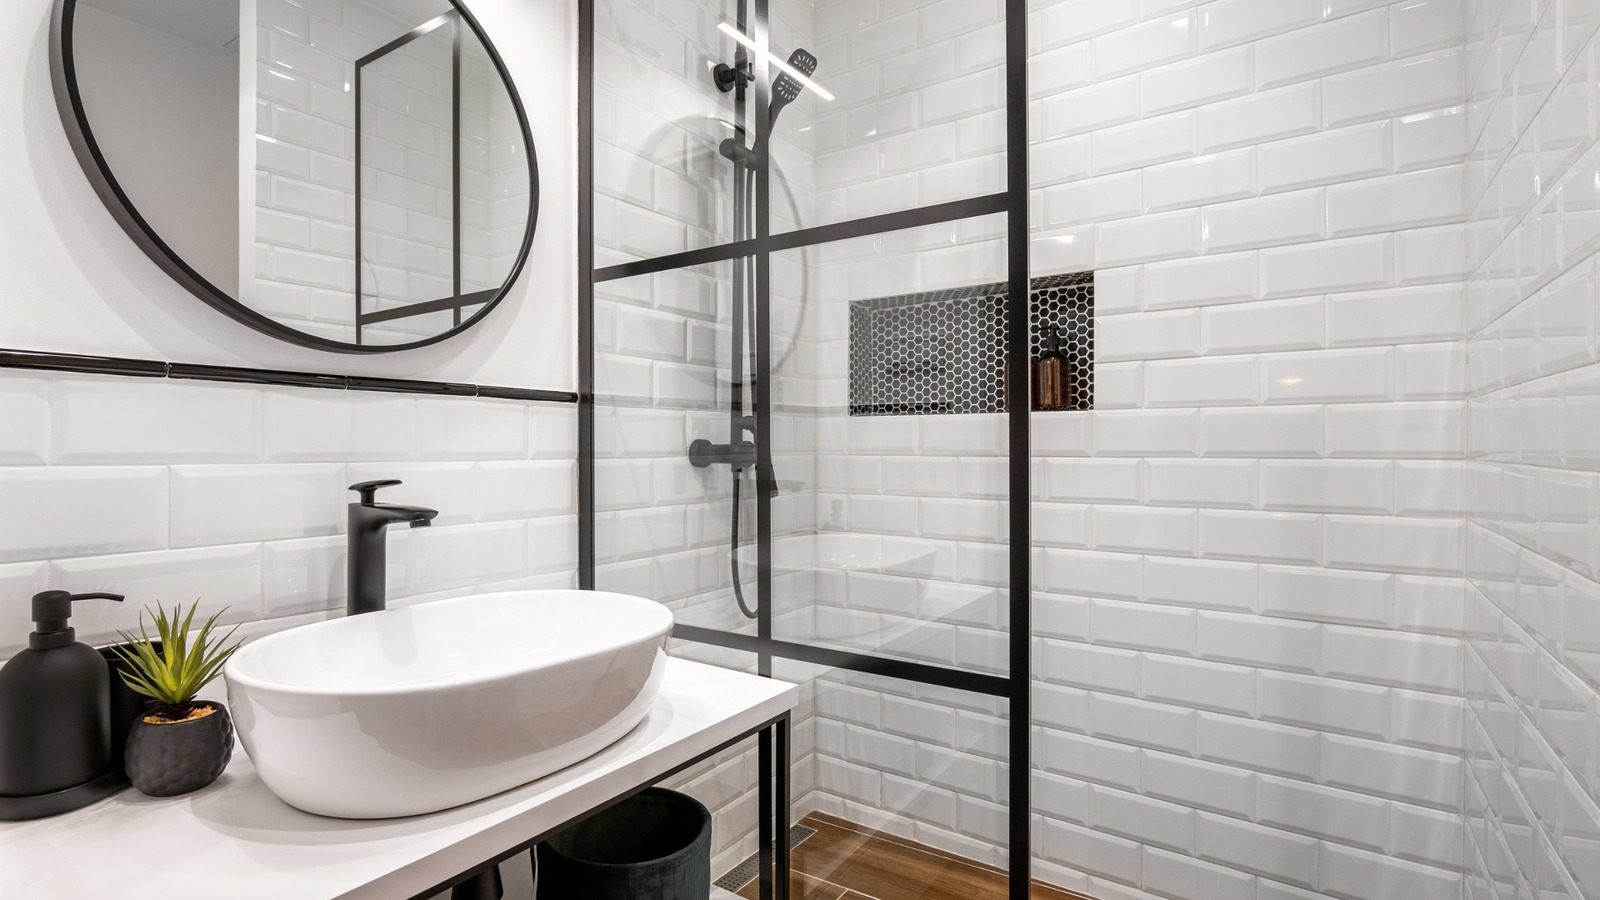 https://www.housedigest.com/img/gallery/the-practical-shower-feature-hgtvs-jasmine-roth-swears-by-for-a-luxurious-bathroom/l-intro-1701798613.jpg